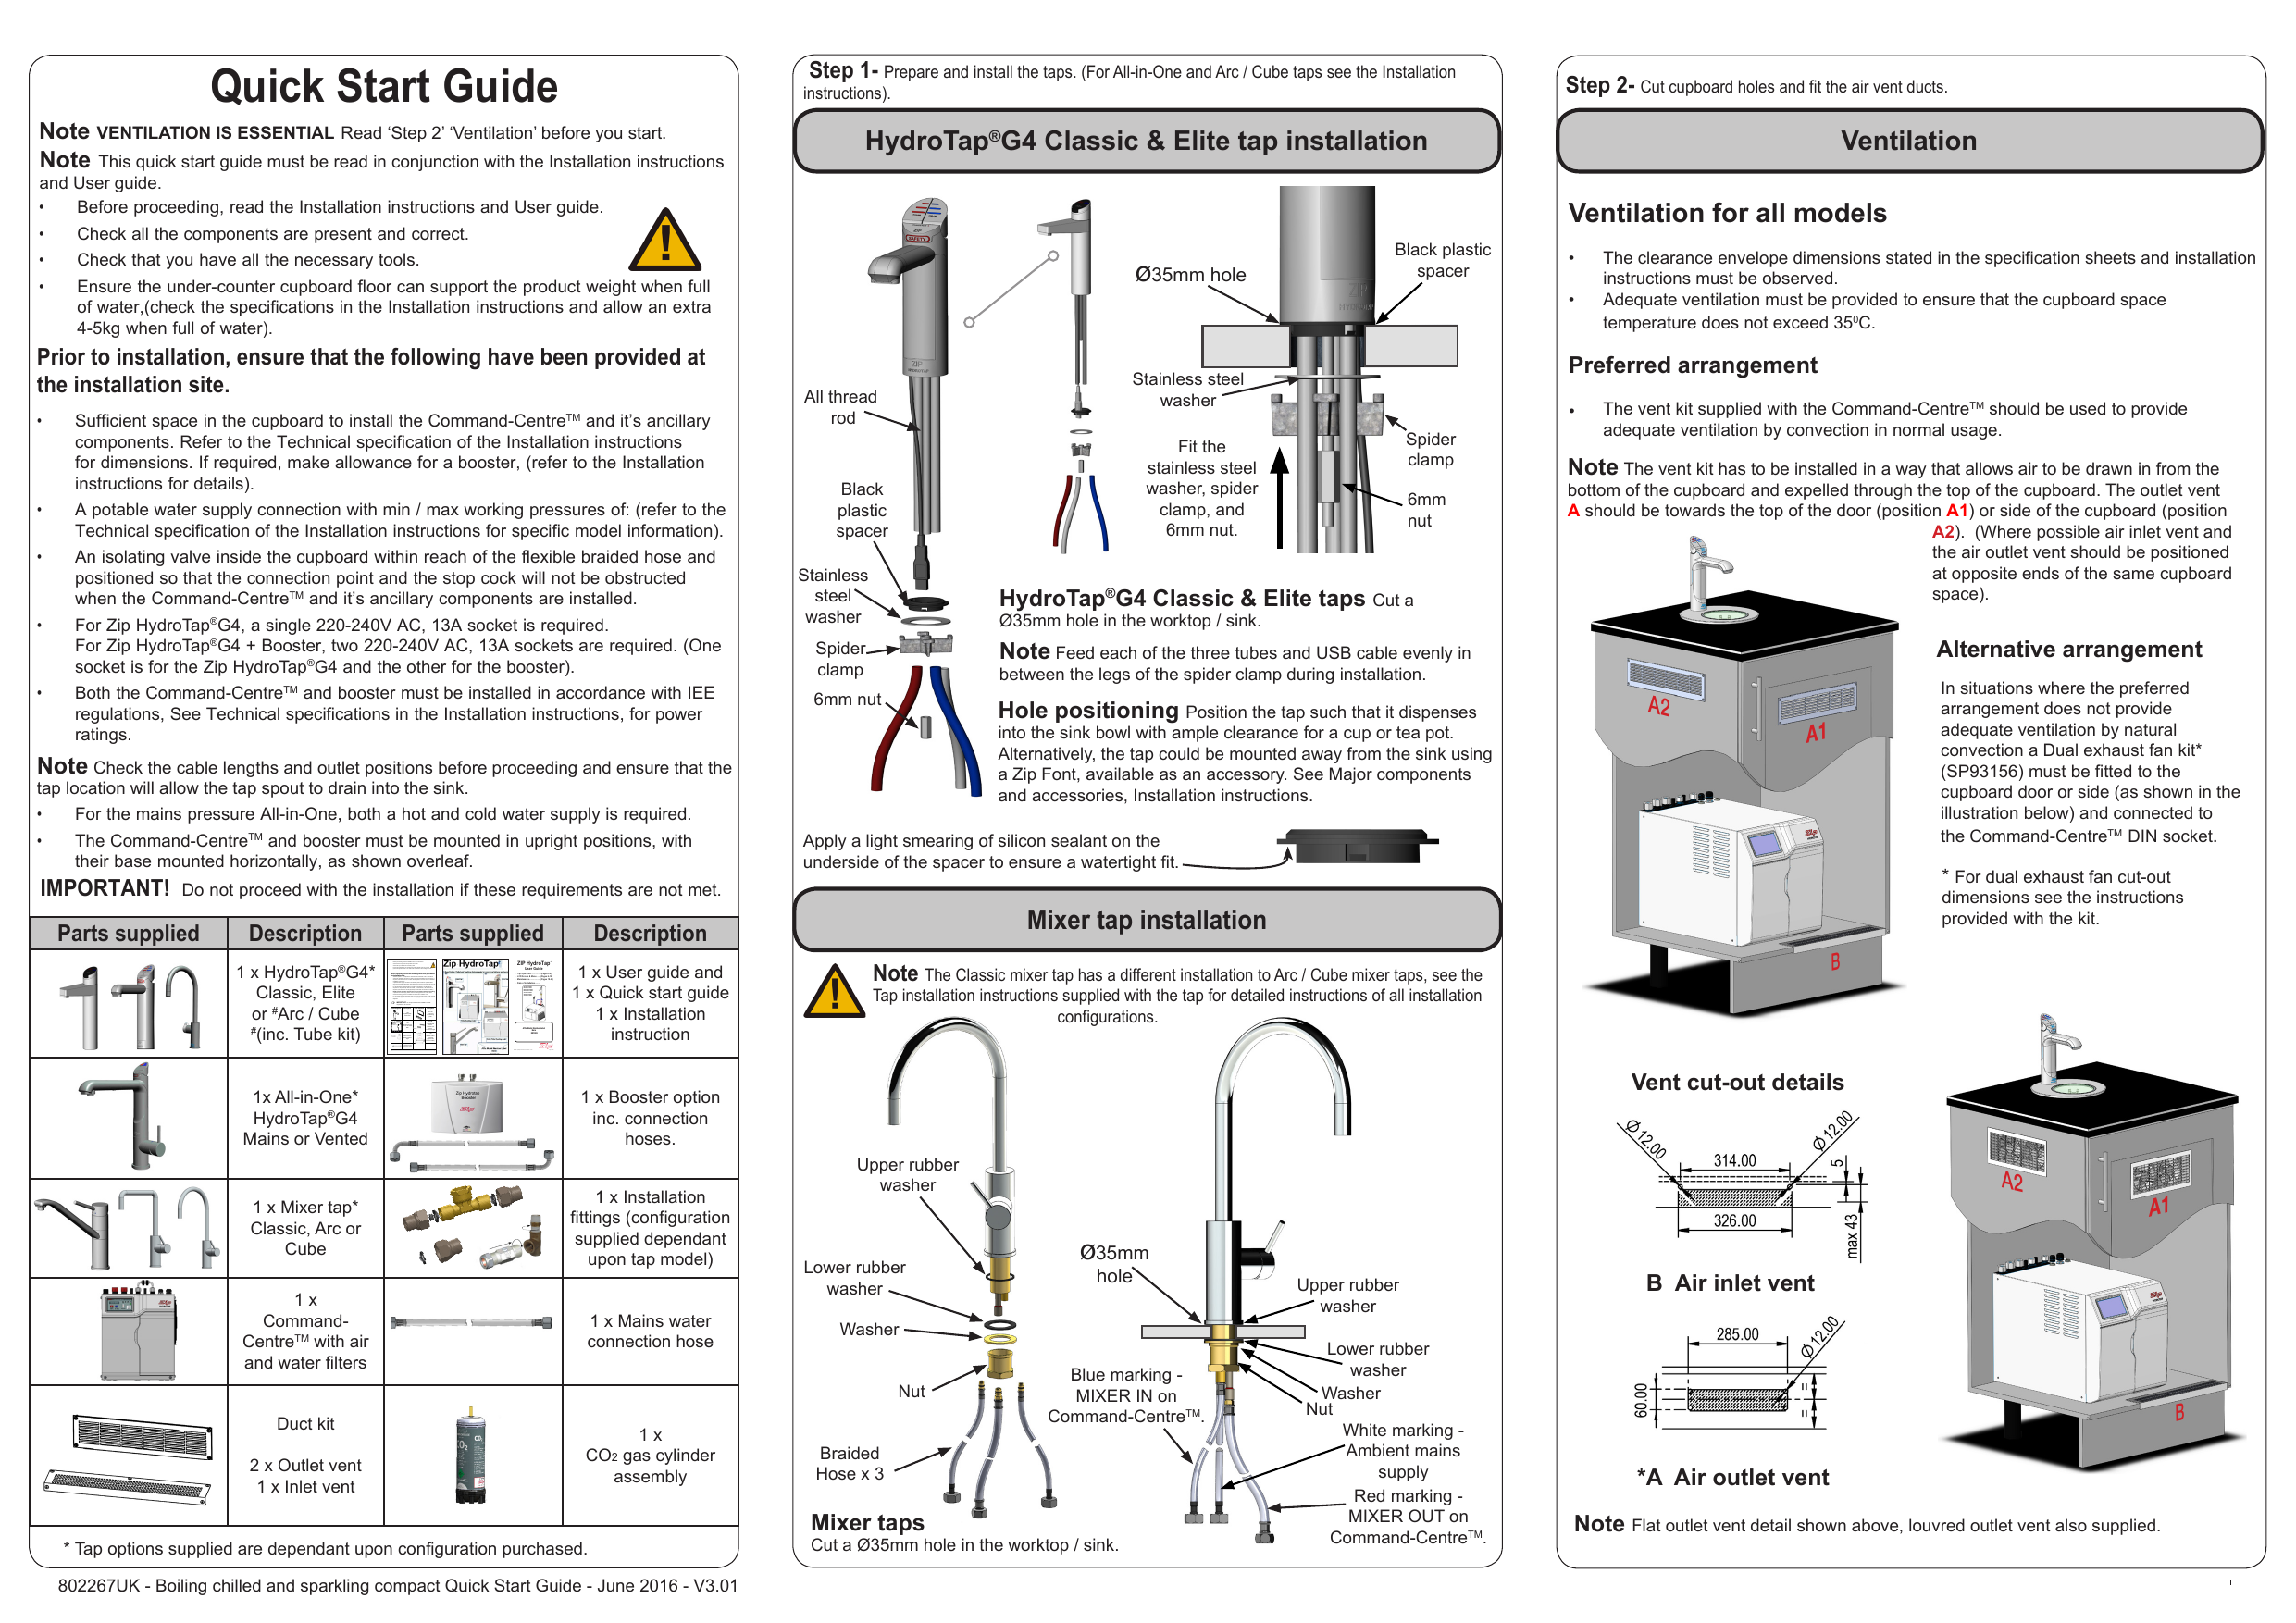 Zip Hydrotap G4 All In One sha Quick Guide Manualzz